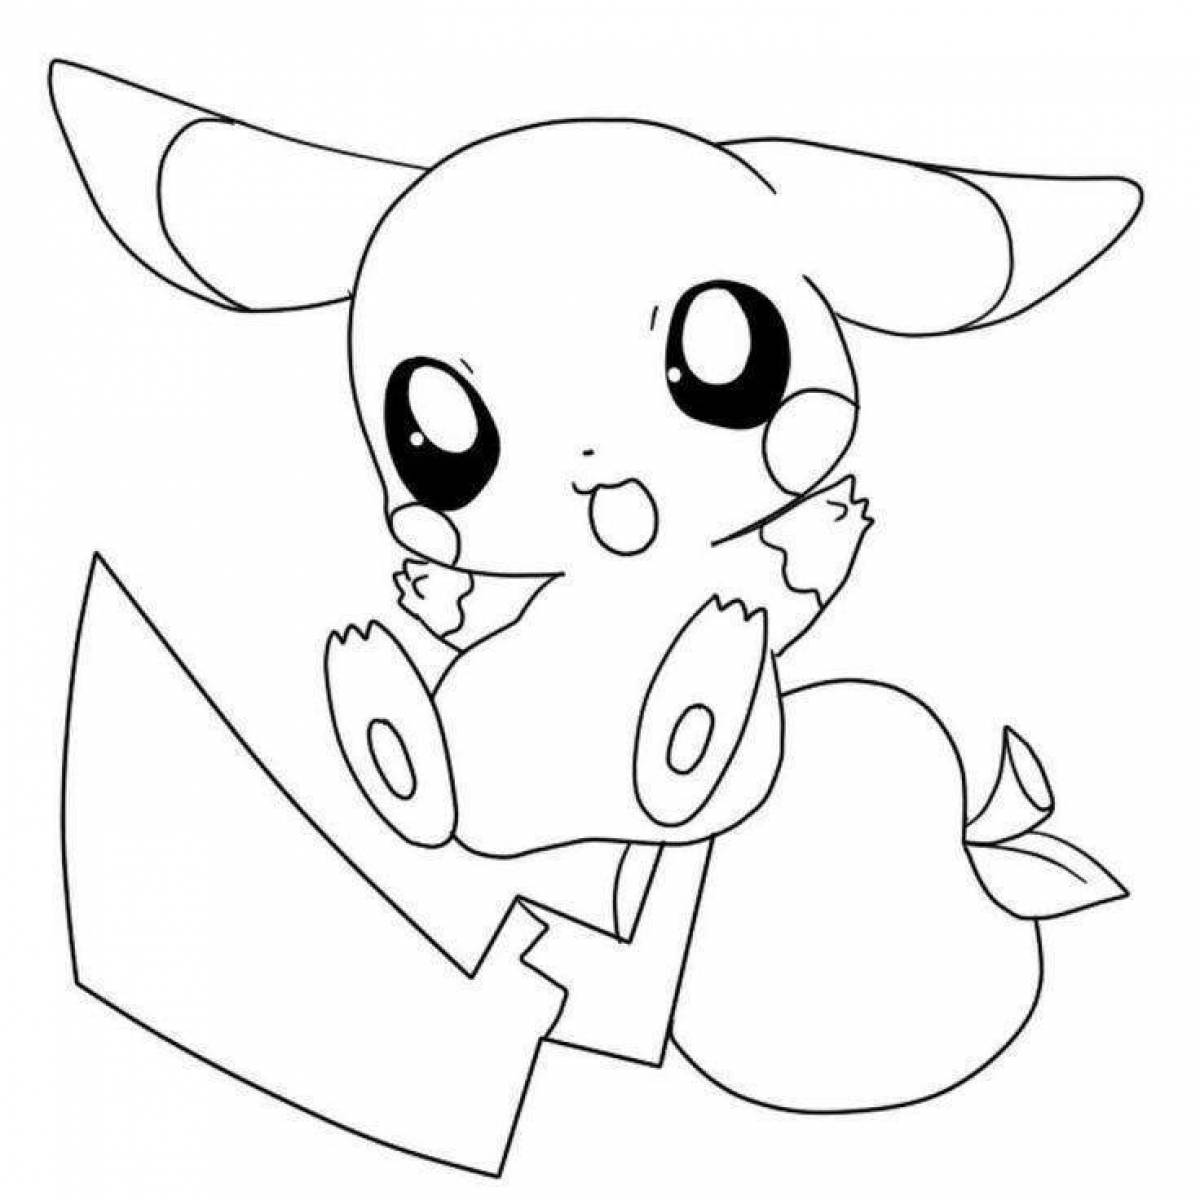 Pikachu live coloring for girls